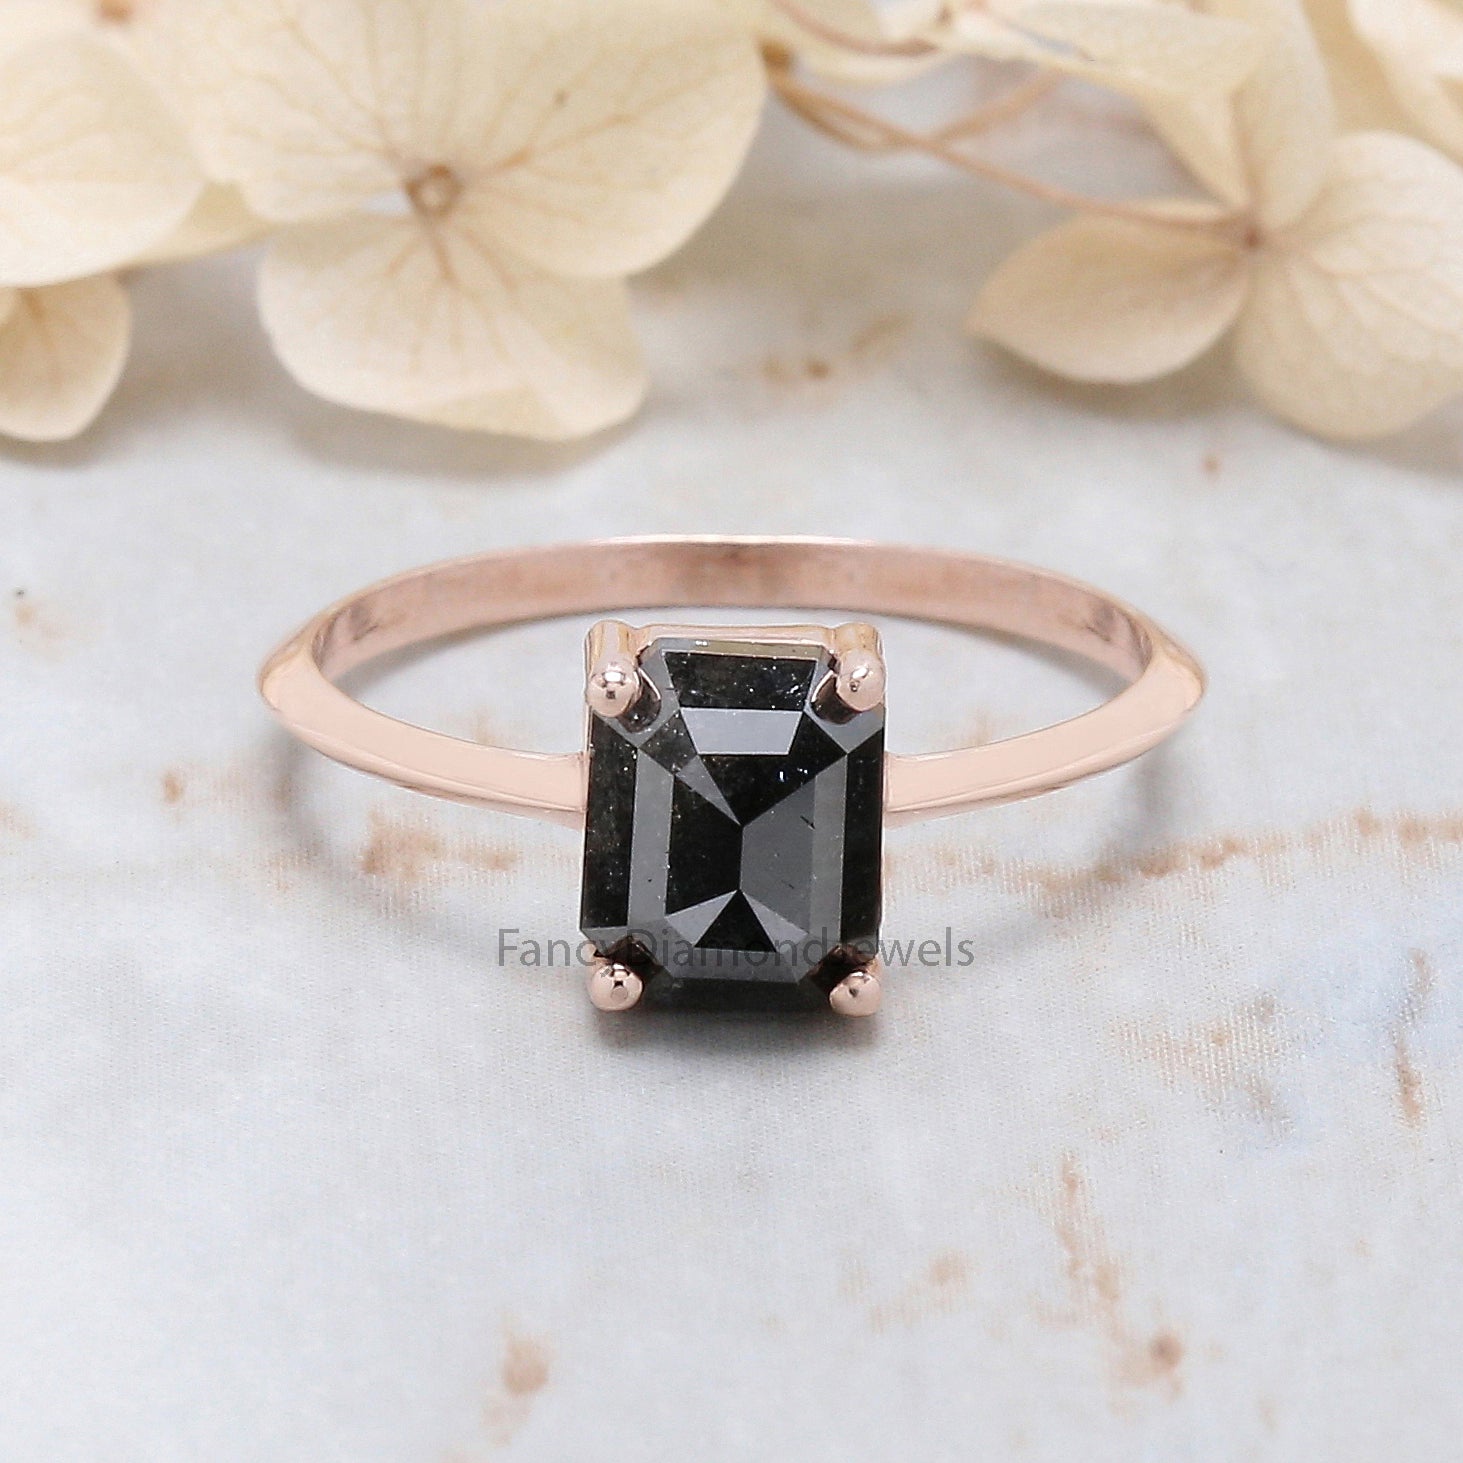 Emerald Cut Salt And Pepper Diamond Ring 1.67 Ct 7.35 MM Emerald Diamond Ring 14K Solid Rose Gold Silver Engagement Ring Gift For Her QL1555